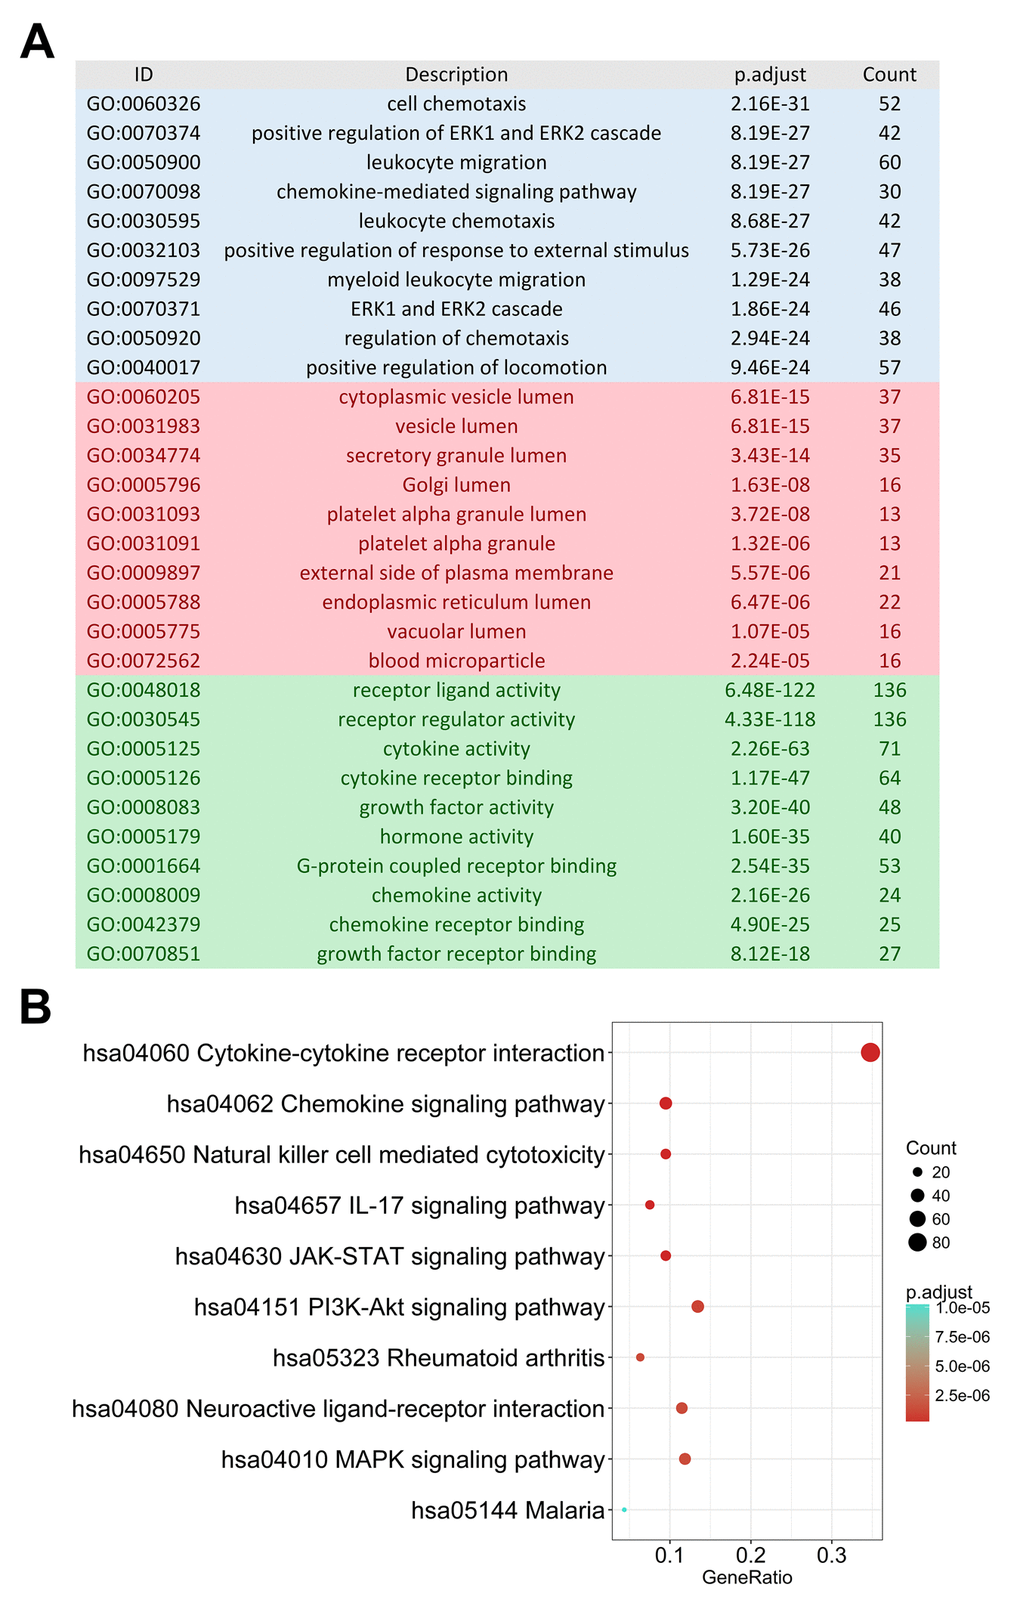 Gene functional enrichment of differentially expressed immune-related genes. (A) Gene ontology analysis; blue, red and green bars represent biological process, cellular component and molecular function, respectively. (B) The top 10 most significant Kyoto Encyclopedia of Genes and Genomes pathways.